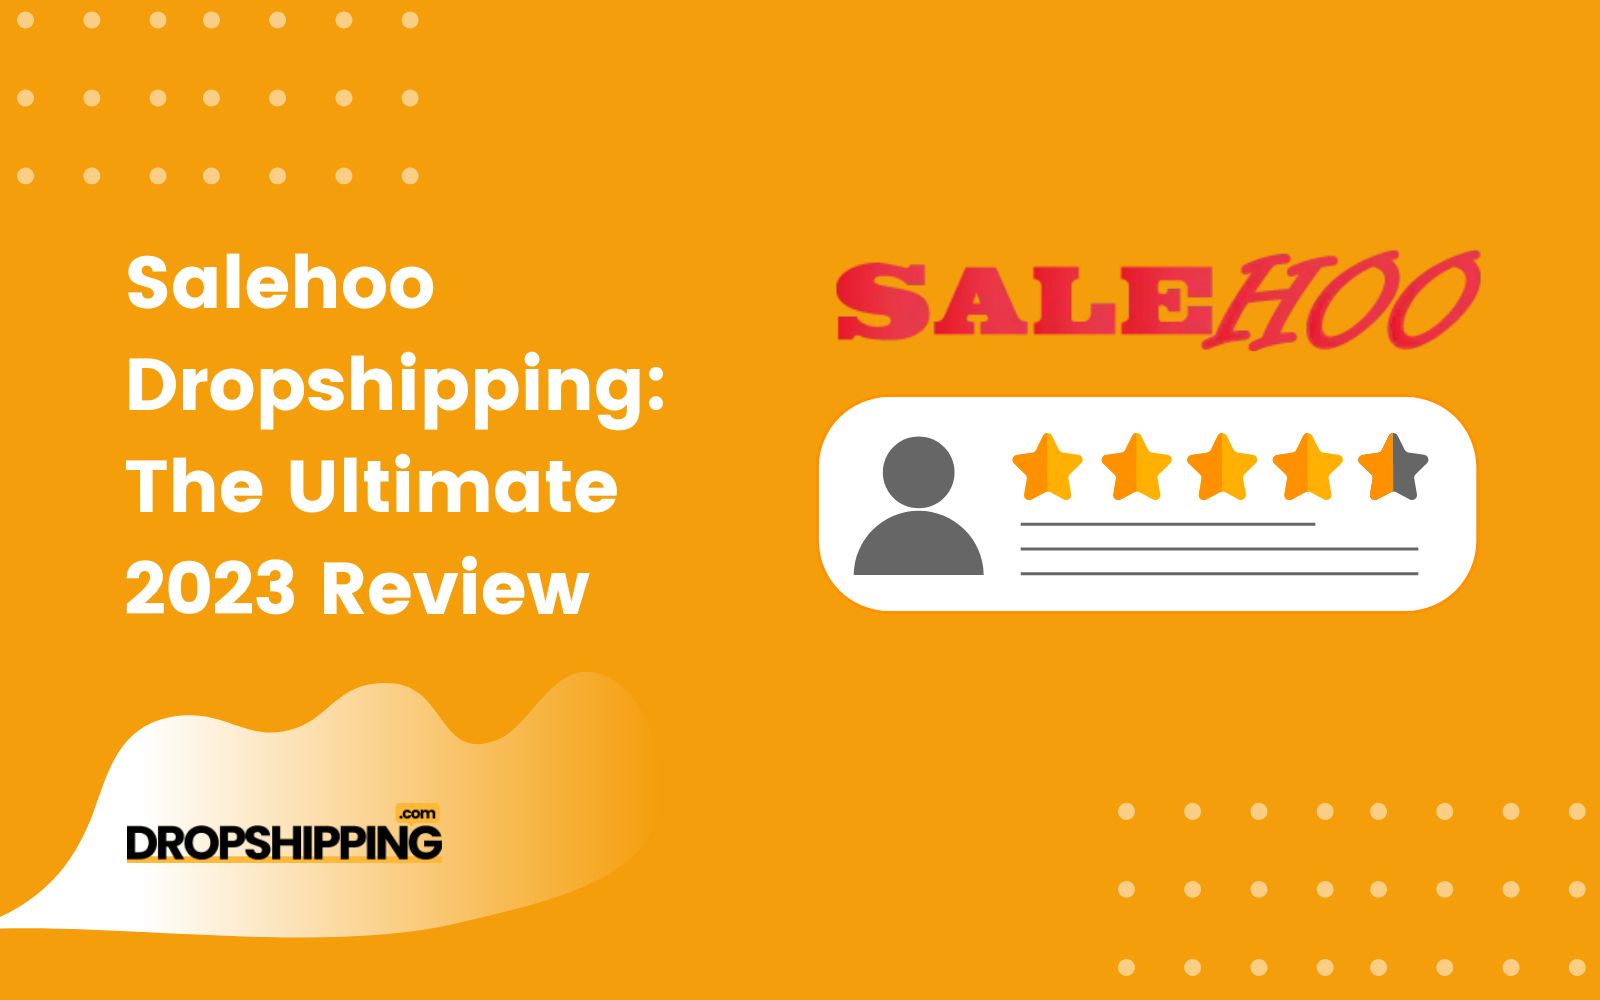 3 More Cool Tools For Salehoo Review